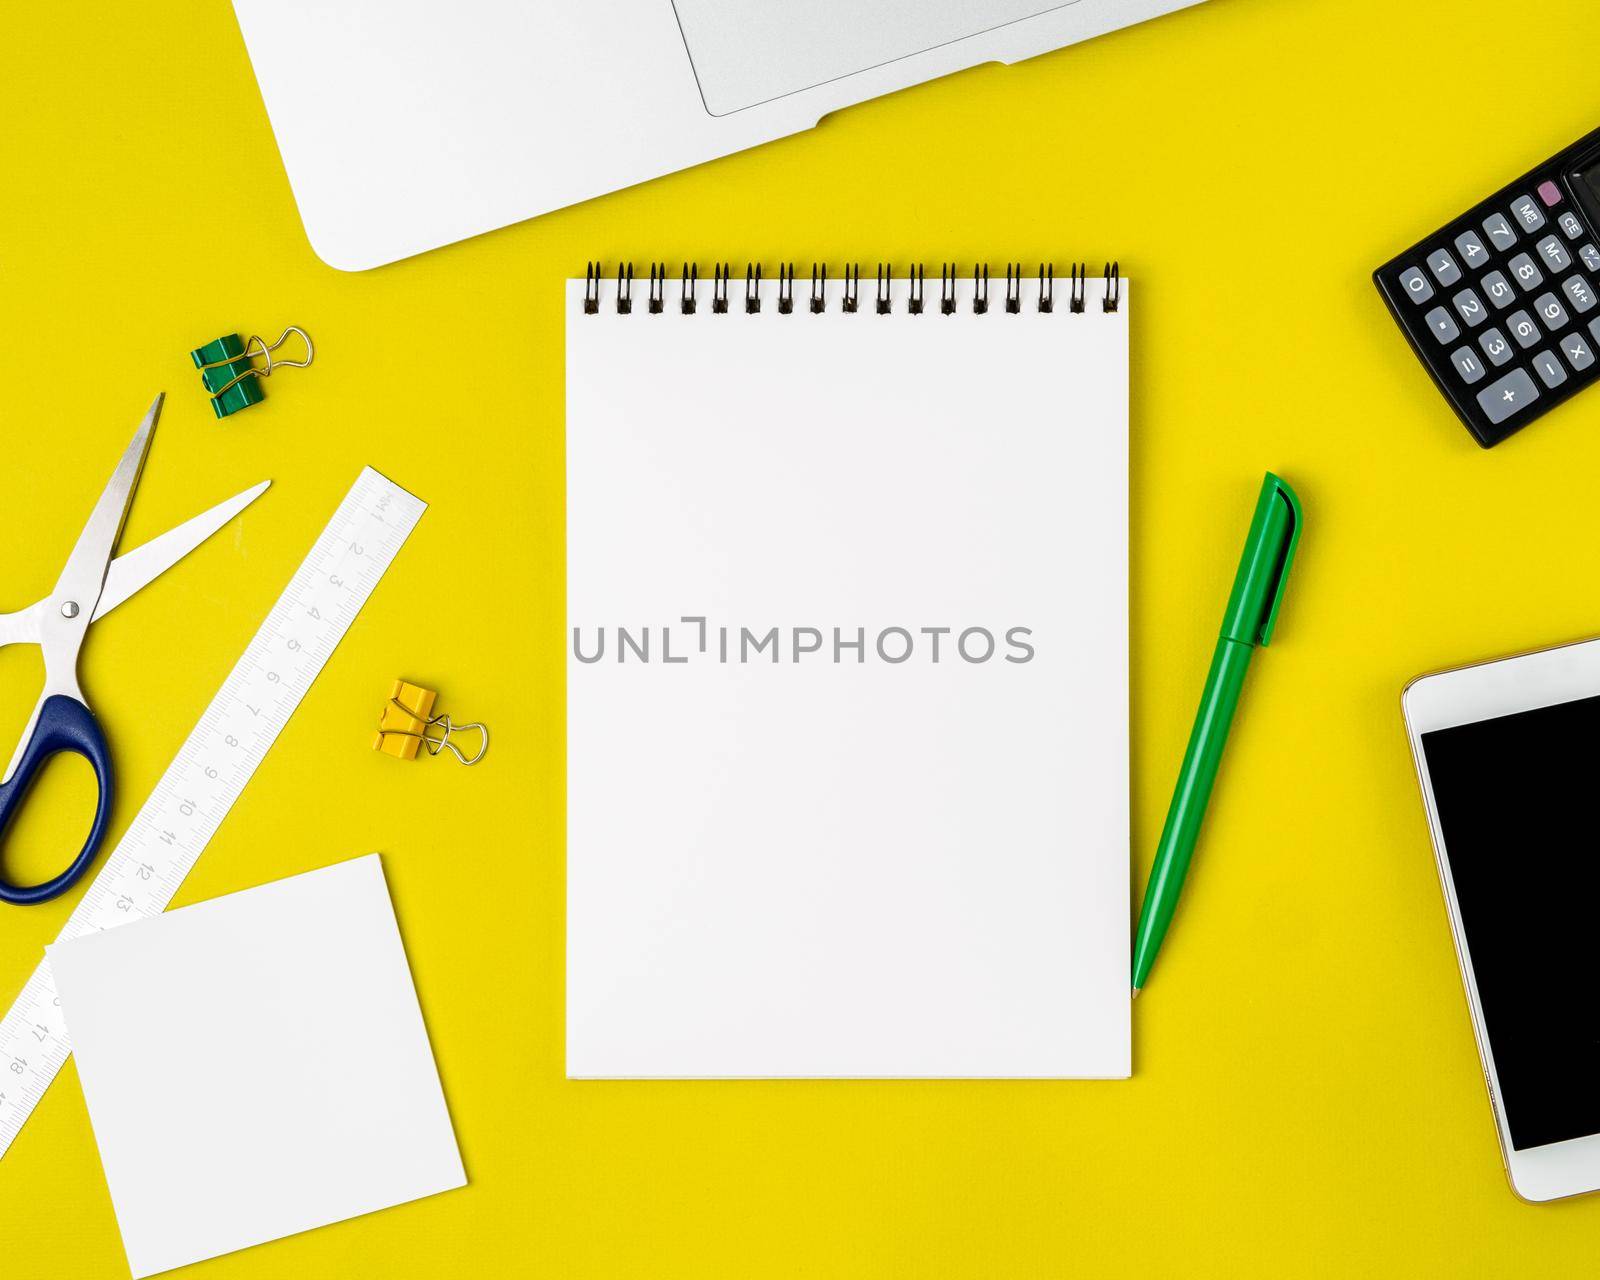 Modern creative bright yellow office desk with laptop, smartphone and other accessories - calculator, scissors, ruler, pen. Blank Notepad page for text in the middle, top view.. by NataBene